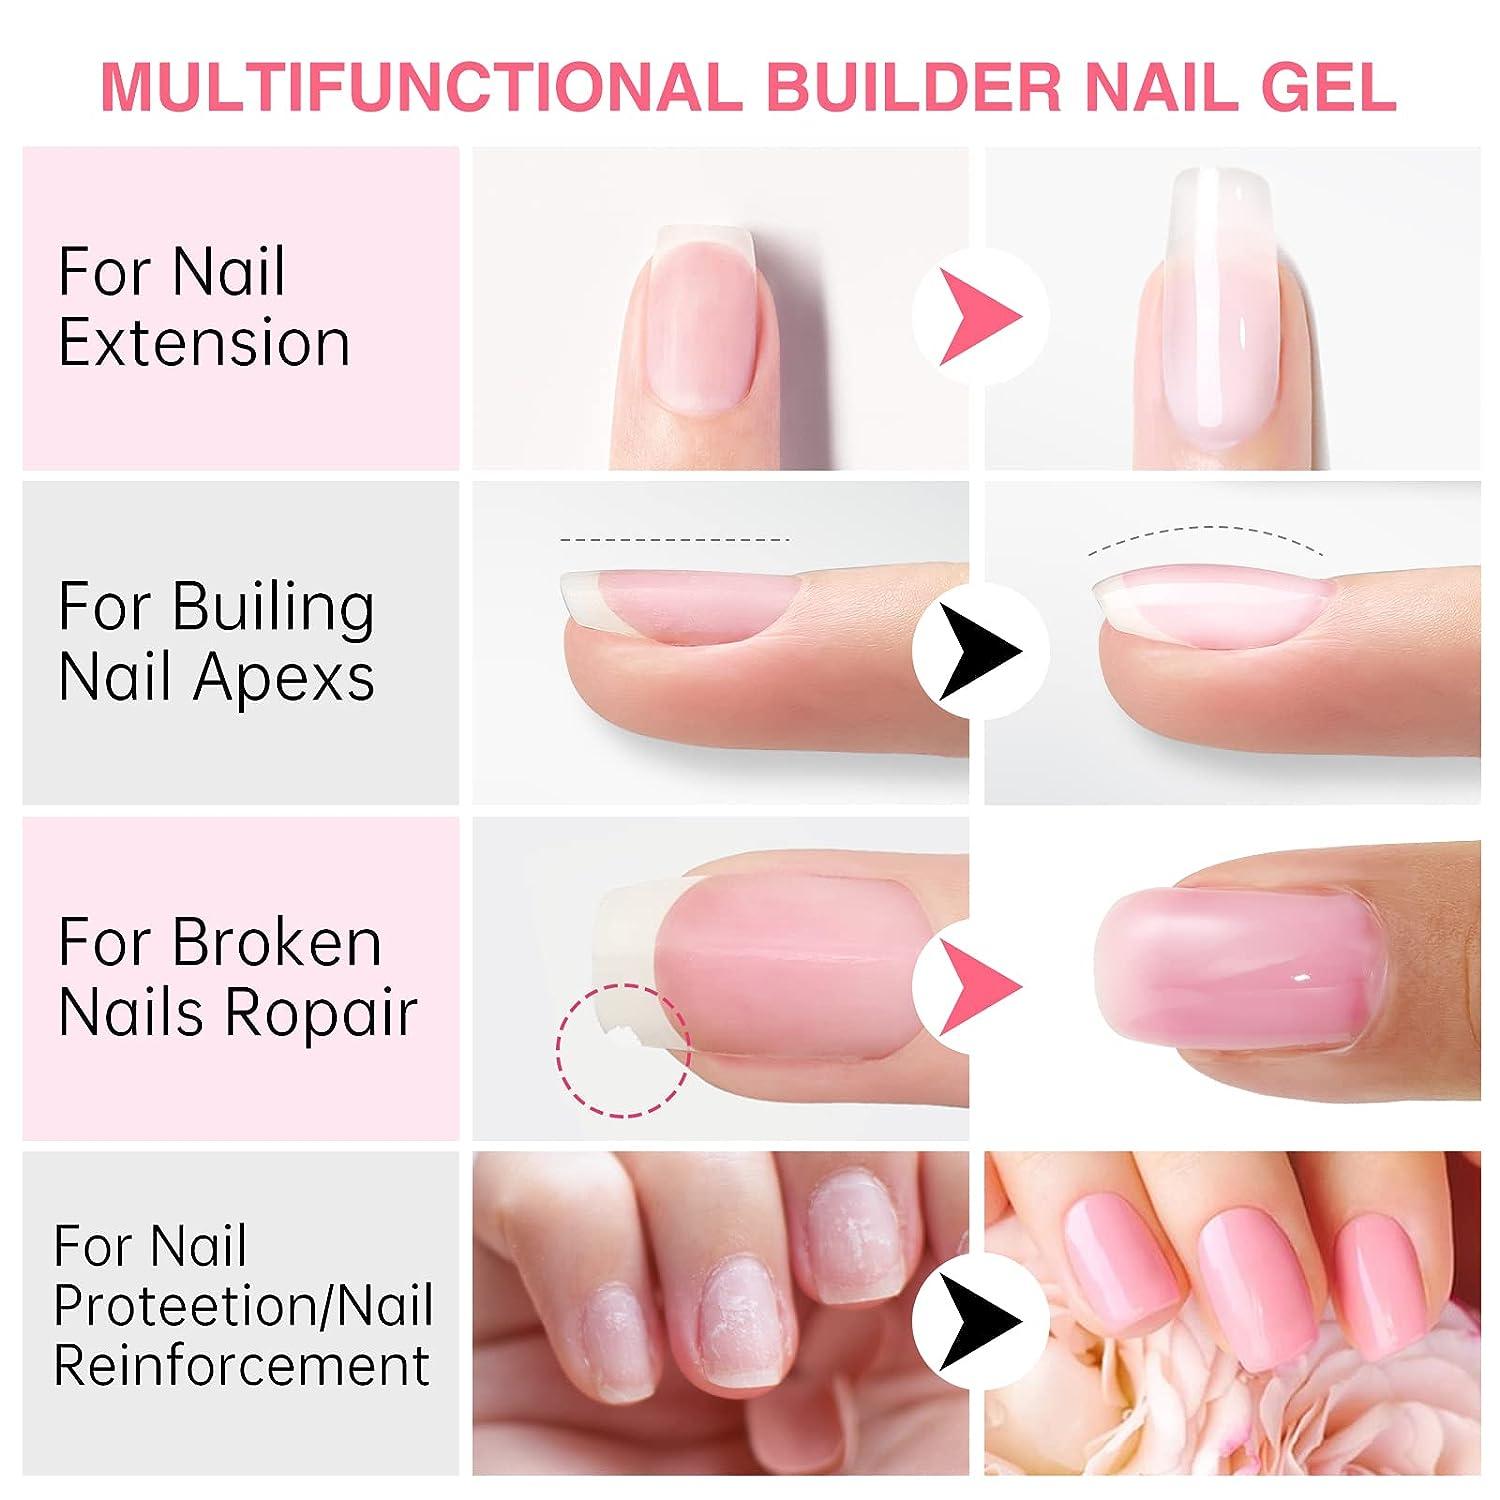 Aimeili 5 in 1 Builder Base Strengthening Gel, UV/LED Clear Building Nail Gel in A Bottle for Nails Extension Gel Polish Coat Nail Repair Nail